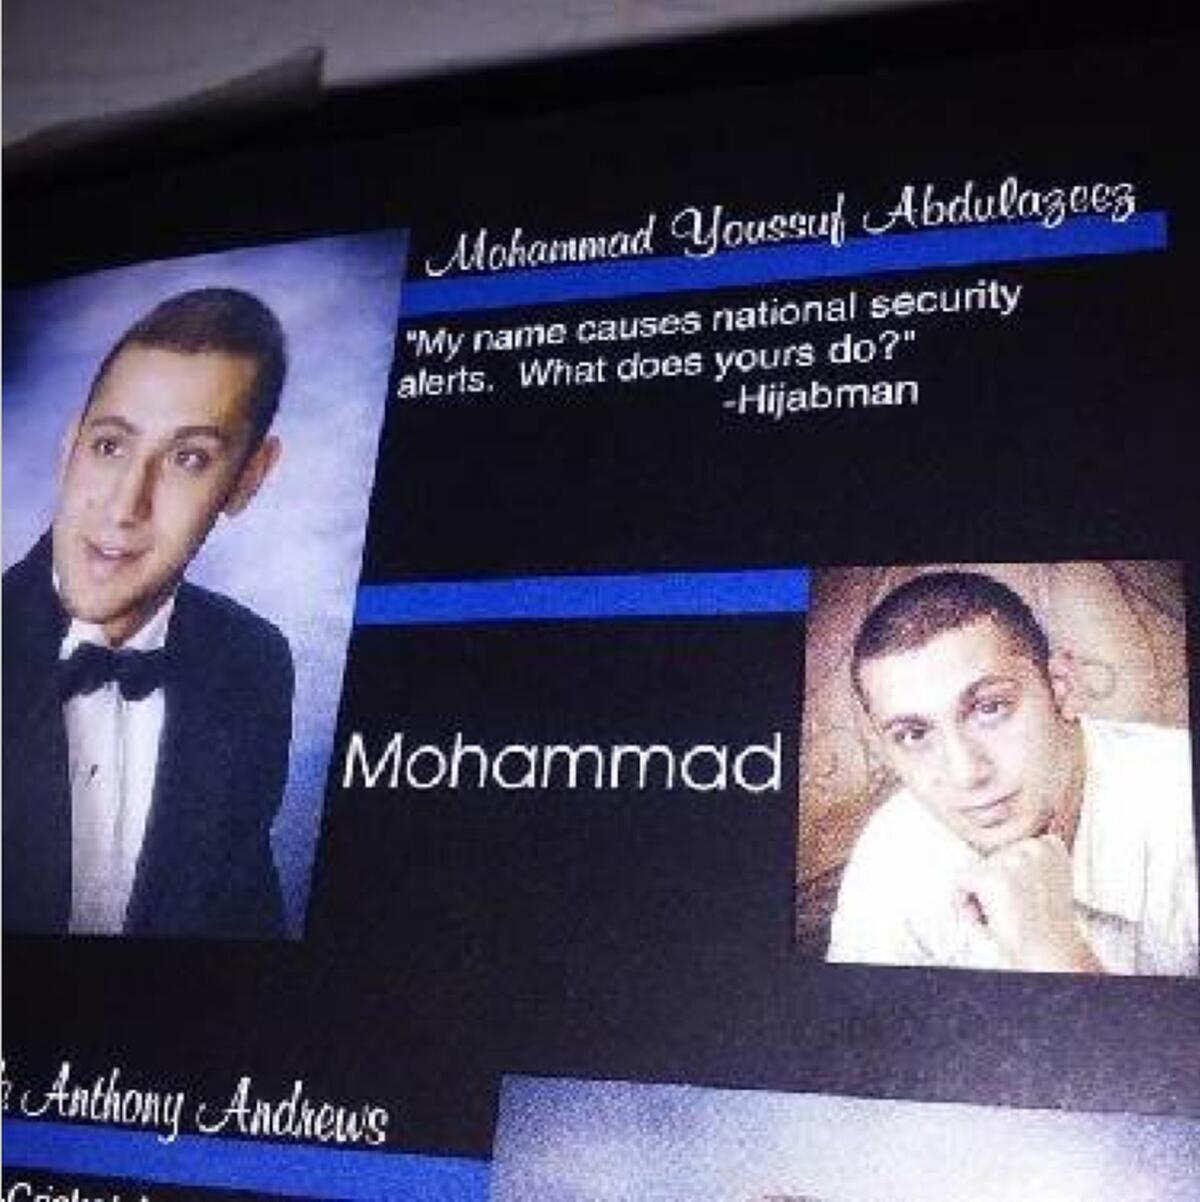 Multiple people who said they went to Red Bank High School with Muhammad Youssef Abdulazeez sent the Times Free Press photos of what appears to be his senior picture and senior quote in the school's yearbook. "My name causes national security alerts," the quote reads. "What does yours do?" A high school friend of Abdulazeez also confirmed to the Los Angeles Times that it was his yearbook photo.